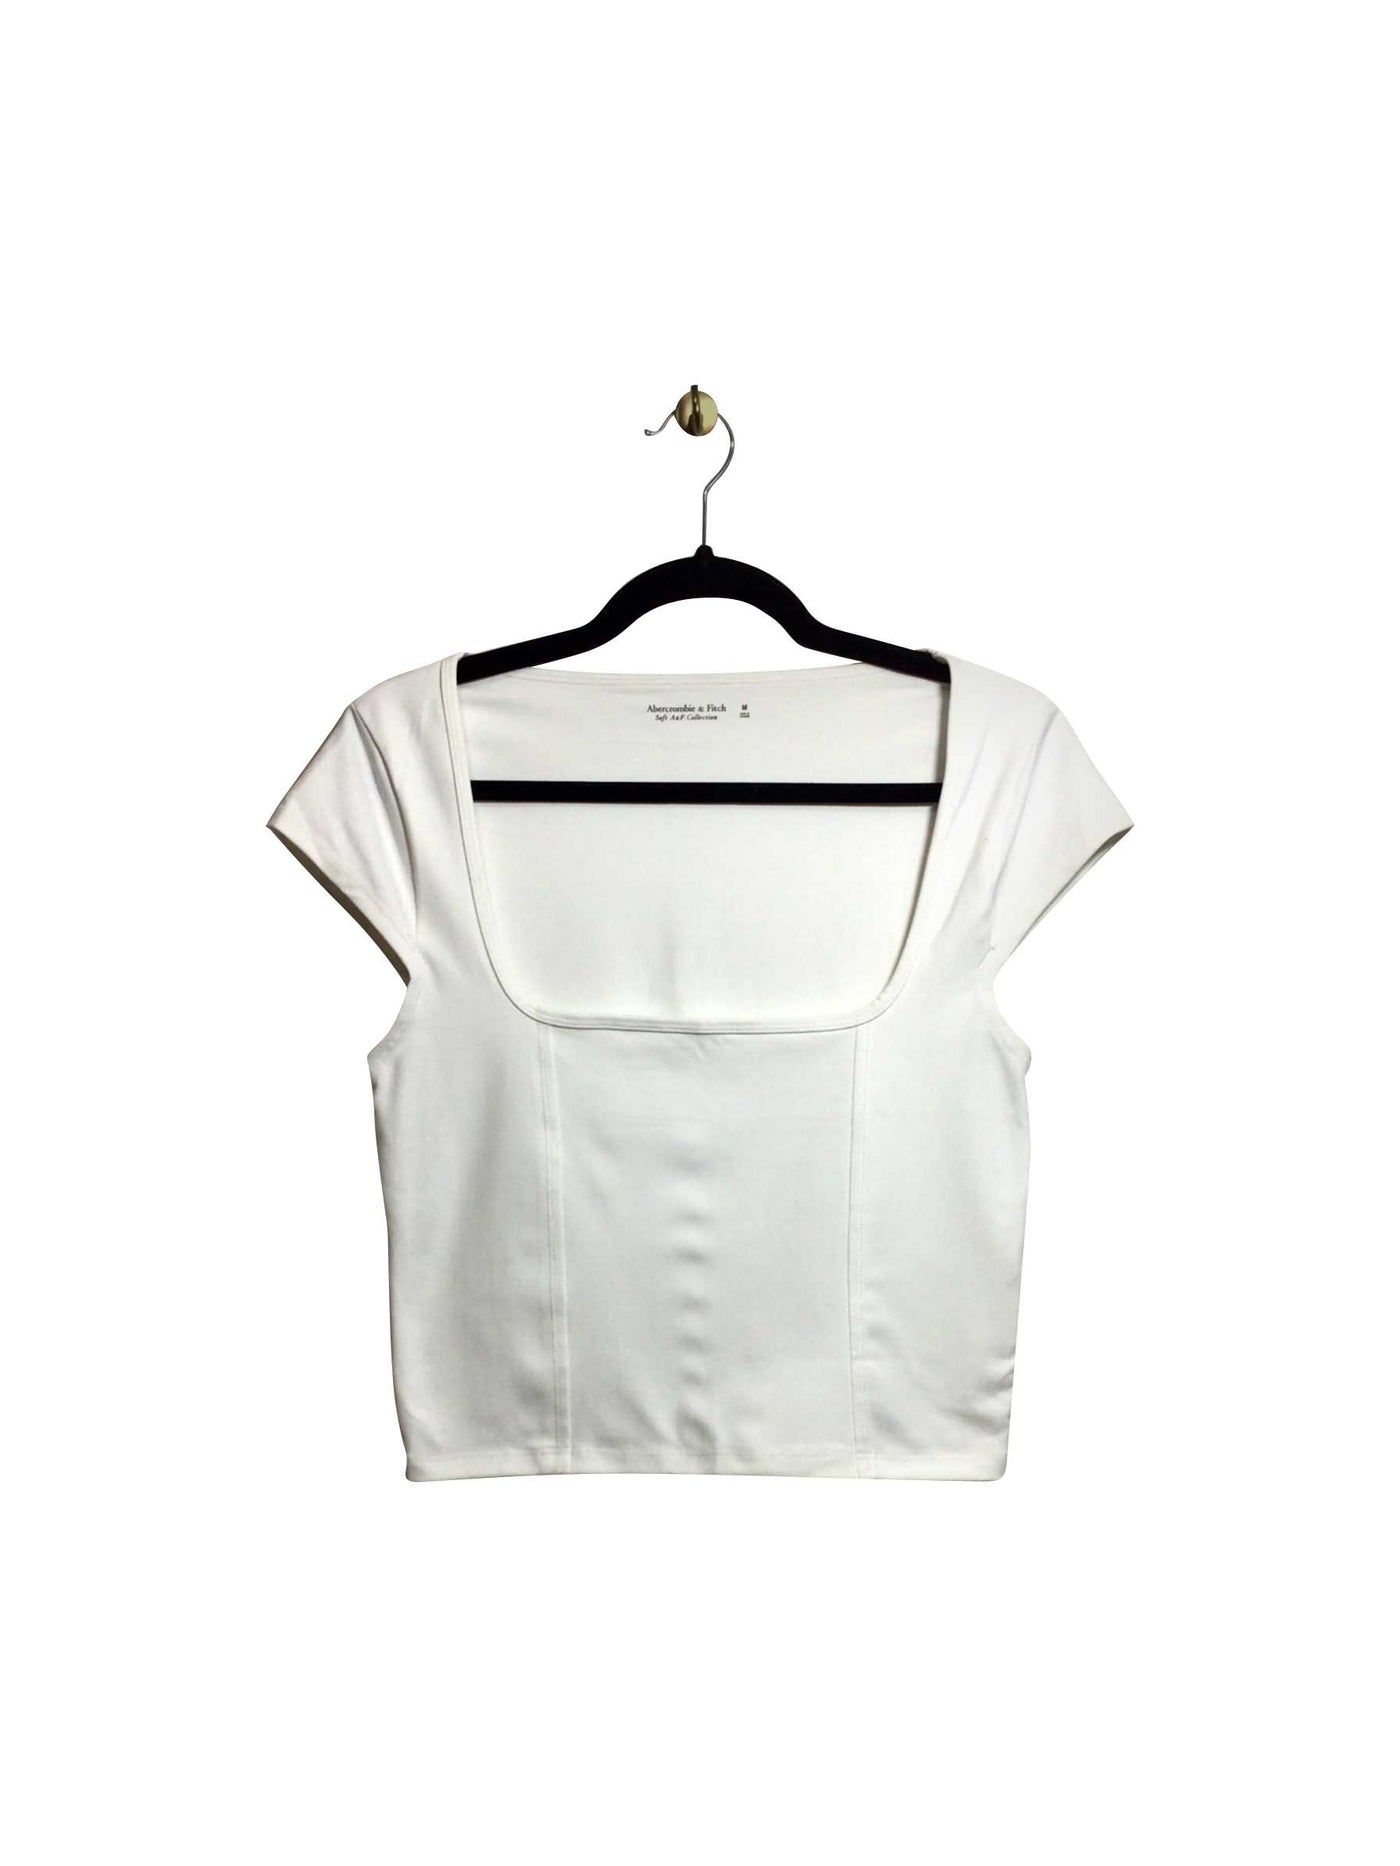 ABERCROMBIE & FITCH Regular fit Crop top in White - Size M | 13 $ KOOP